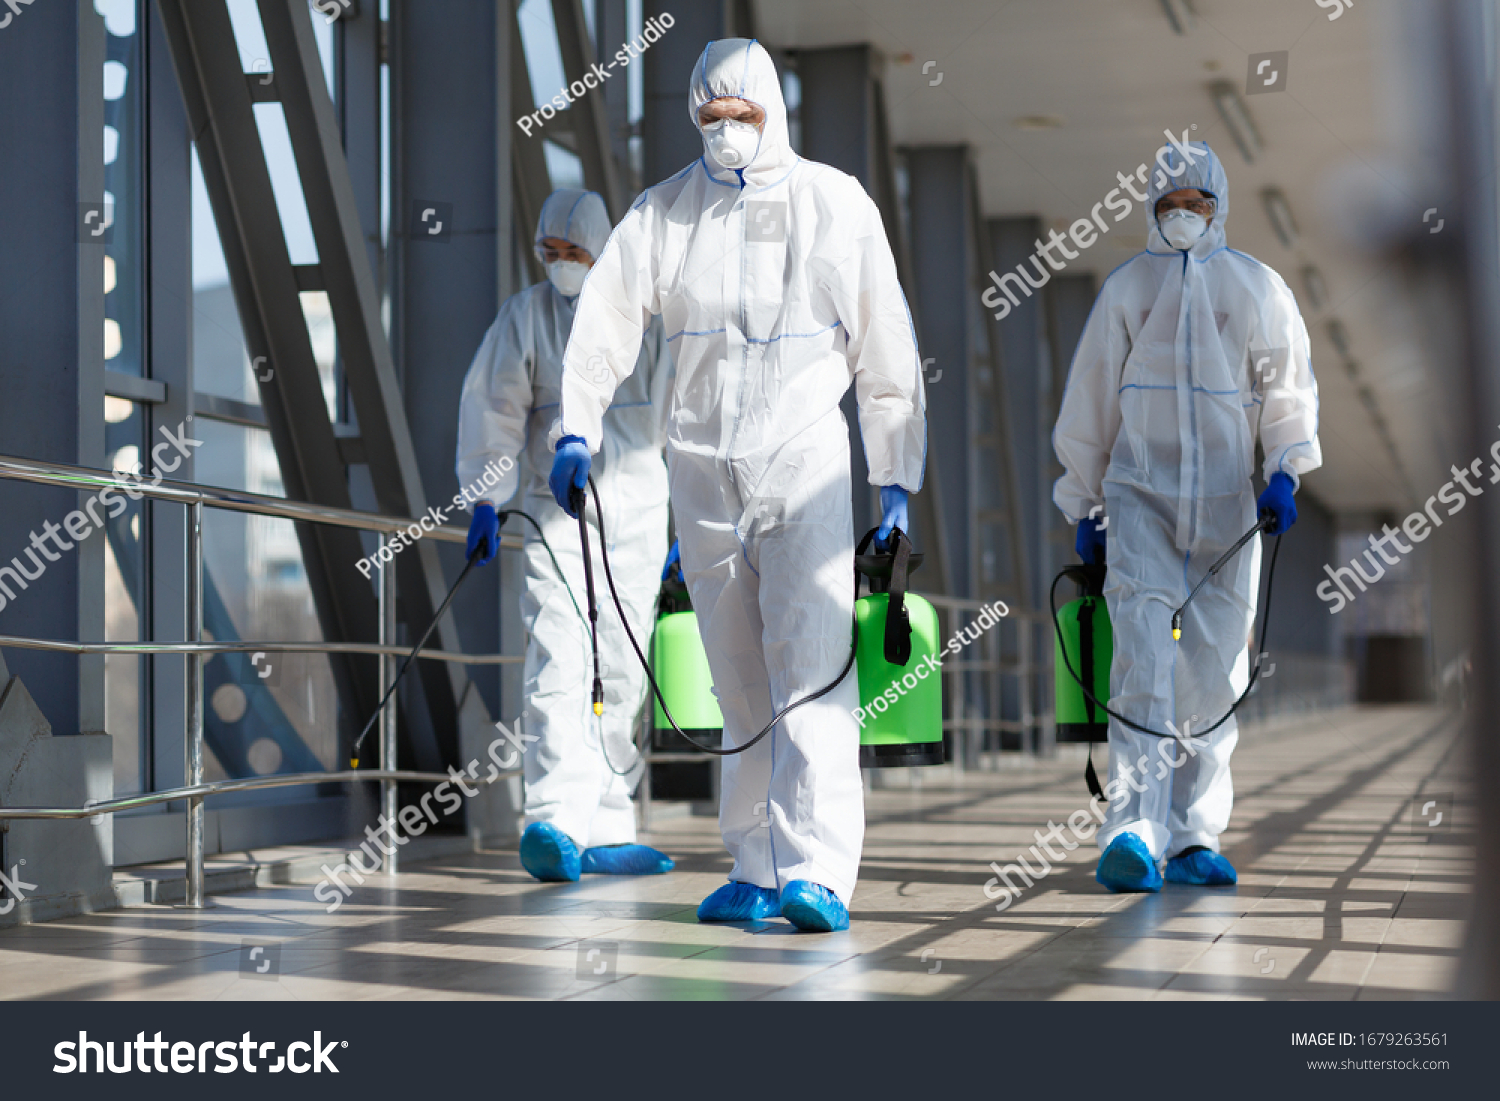 People in virus protective suits and mask disinfecting buildings of coronavirus with the sprayer, #1679263561